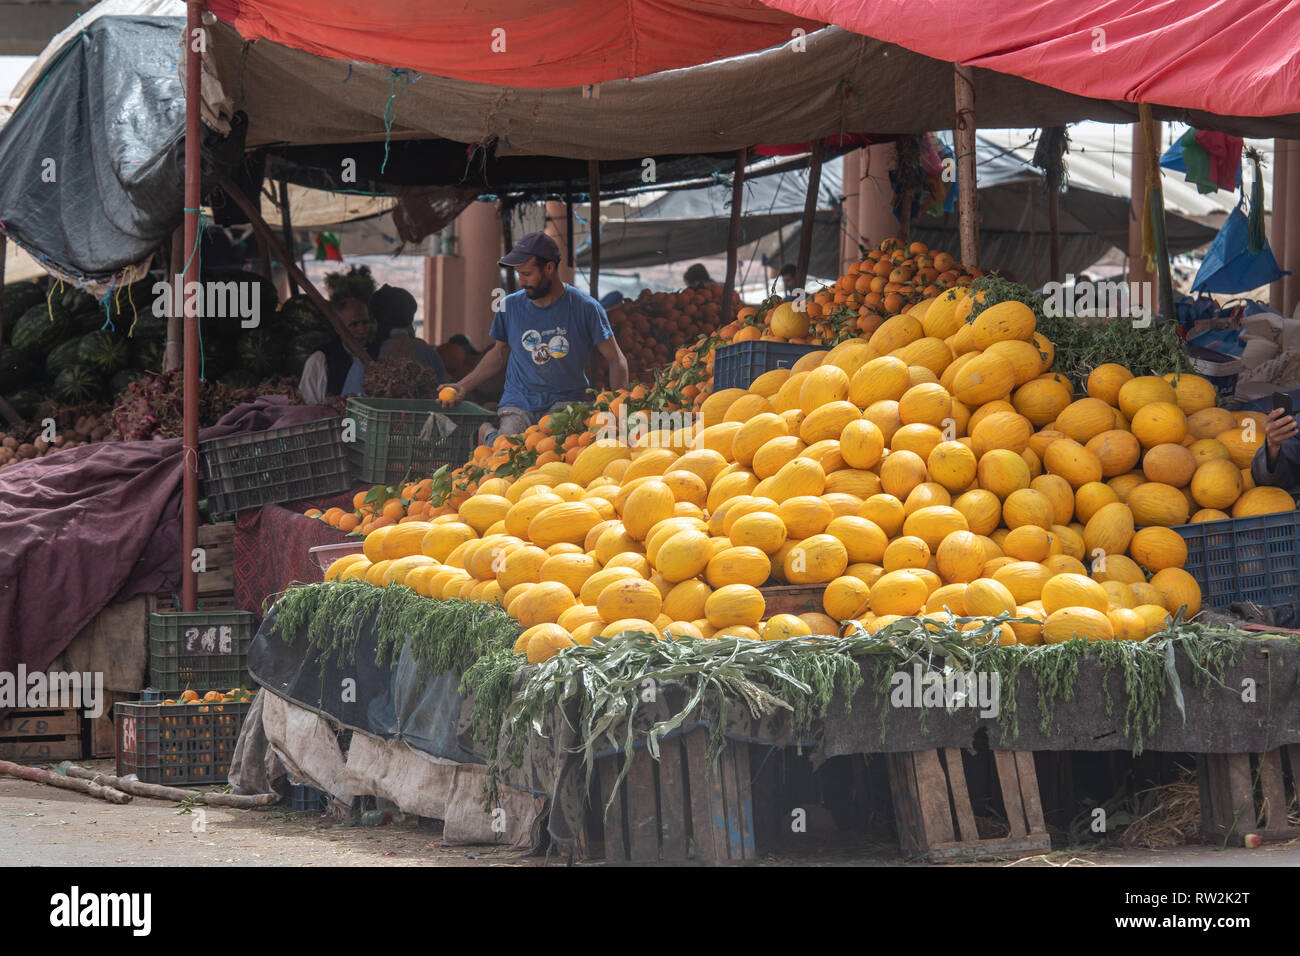 Canary melons stacked high on stall at souk (outdoor market) while man browses, Tighmert Oasis, Morocco Stock Photo